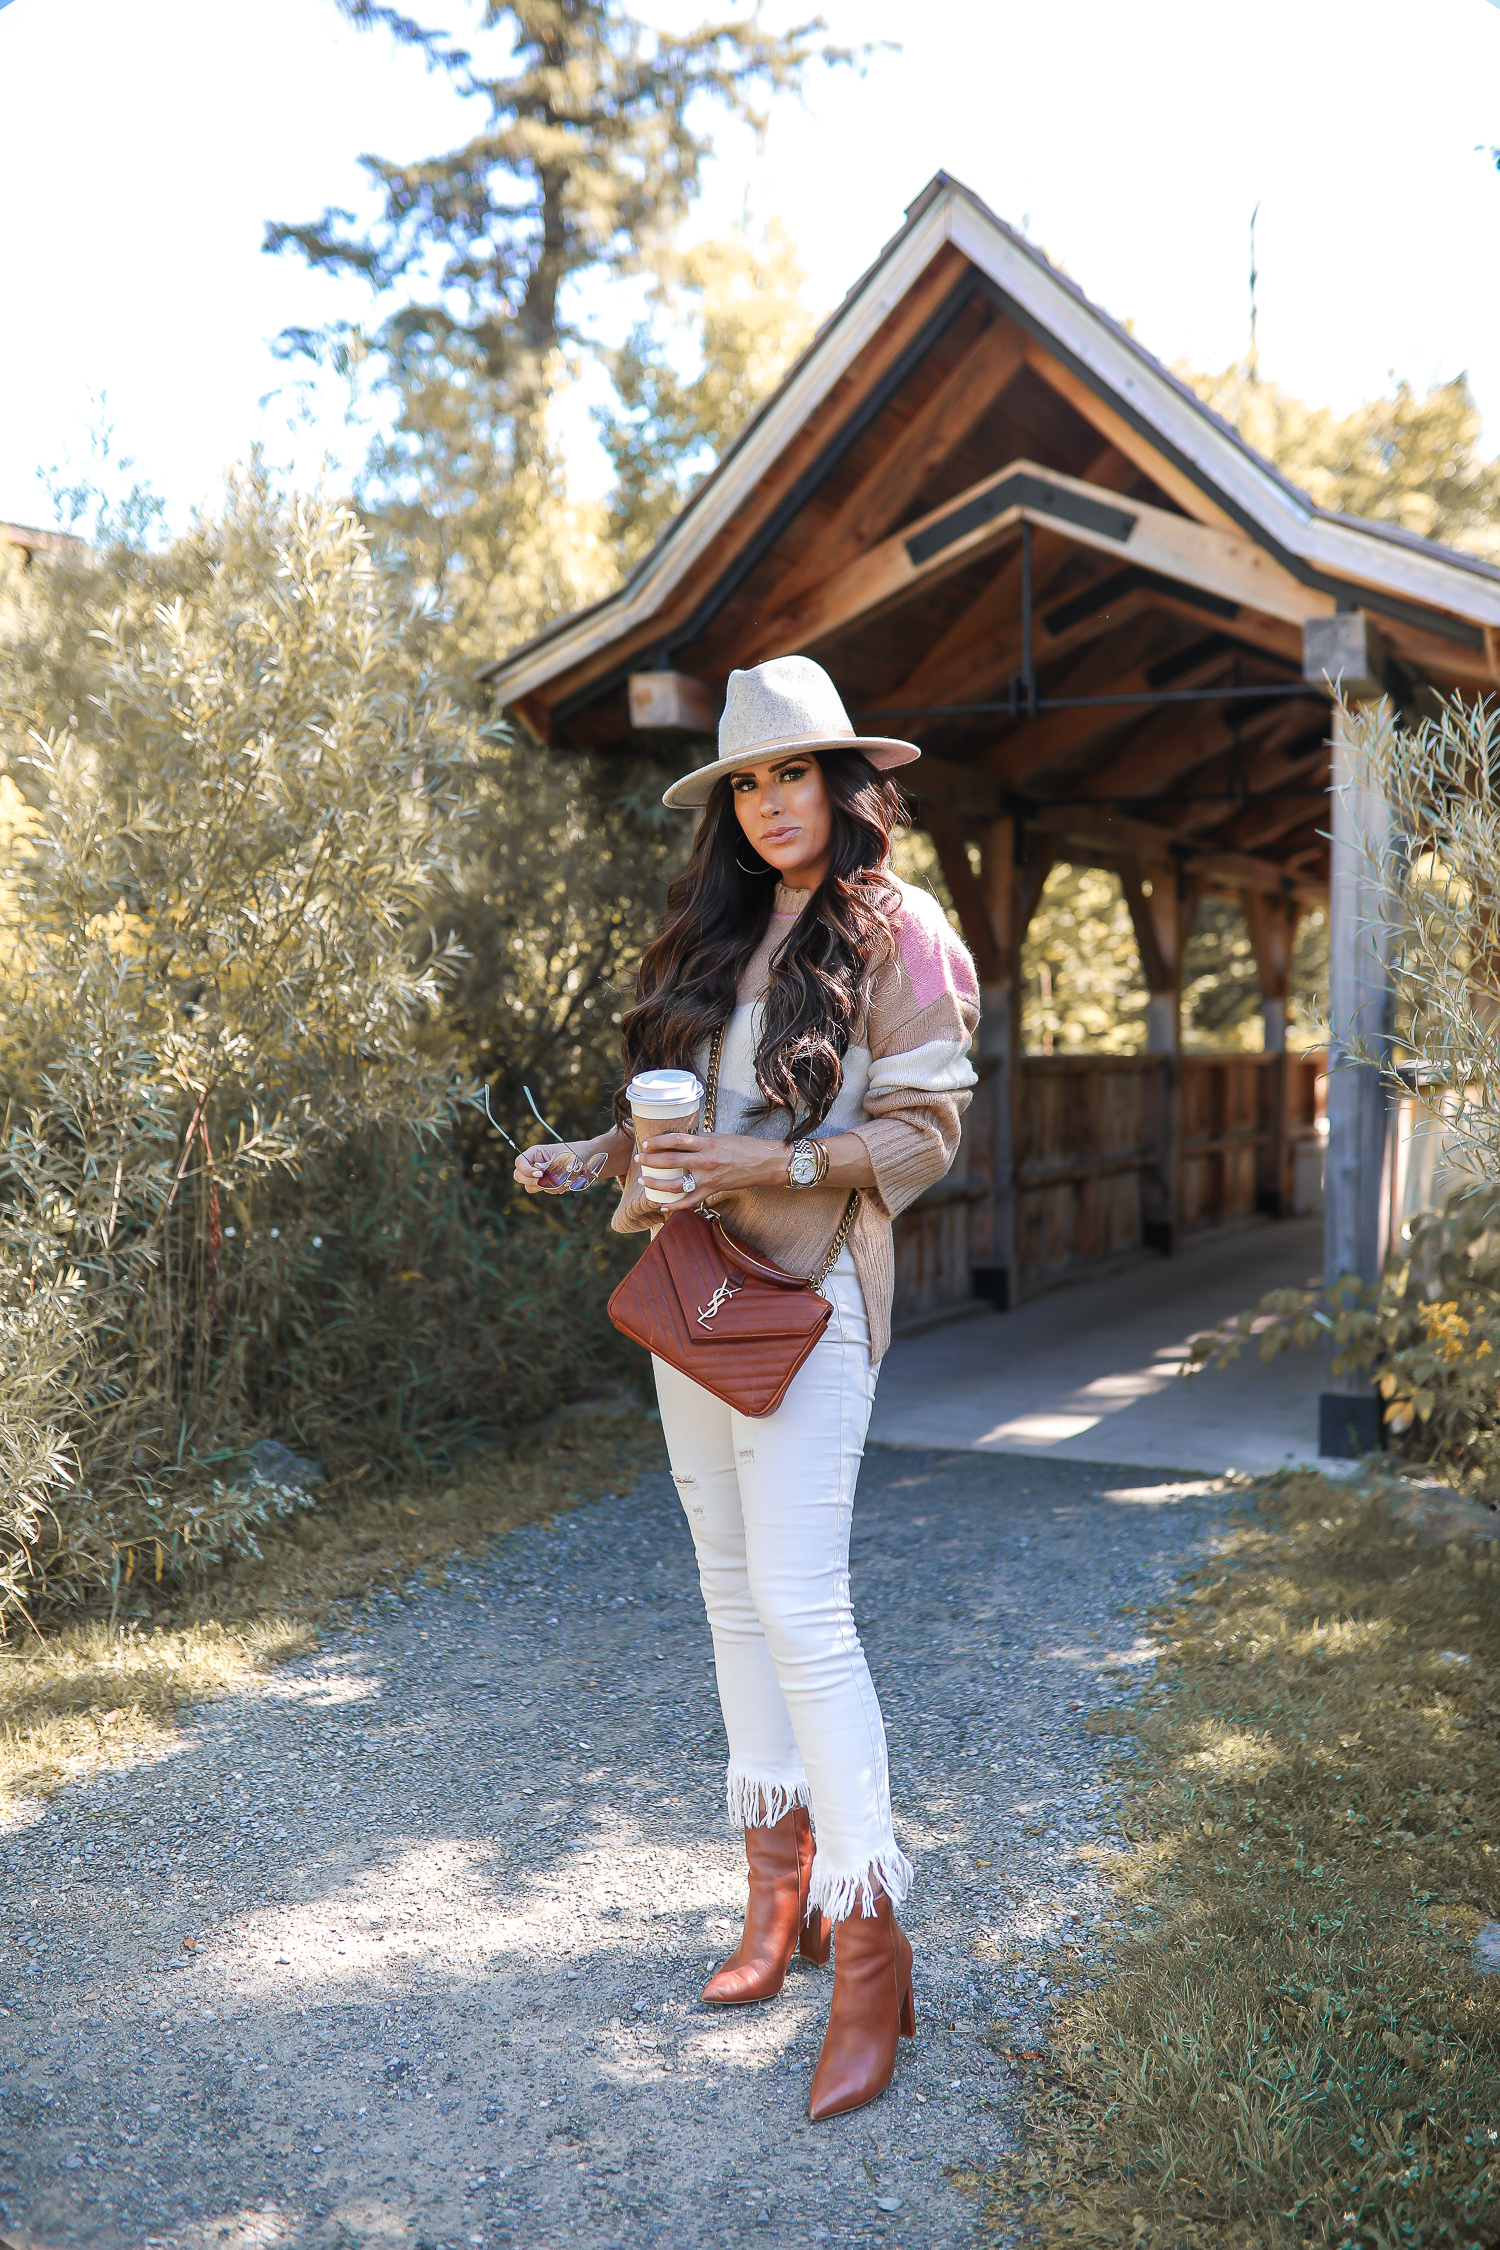 fall fashion pinterest 2019, stowe vermont, YSL collage tan bag, Lack of color mack hat, Topshop colorblock sweater tan and pink, Emily Gemma-13